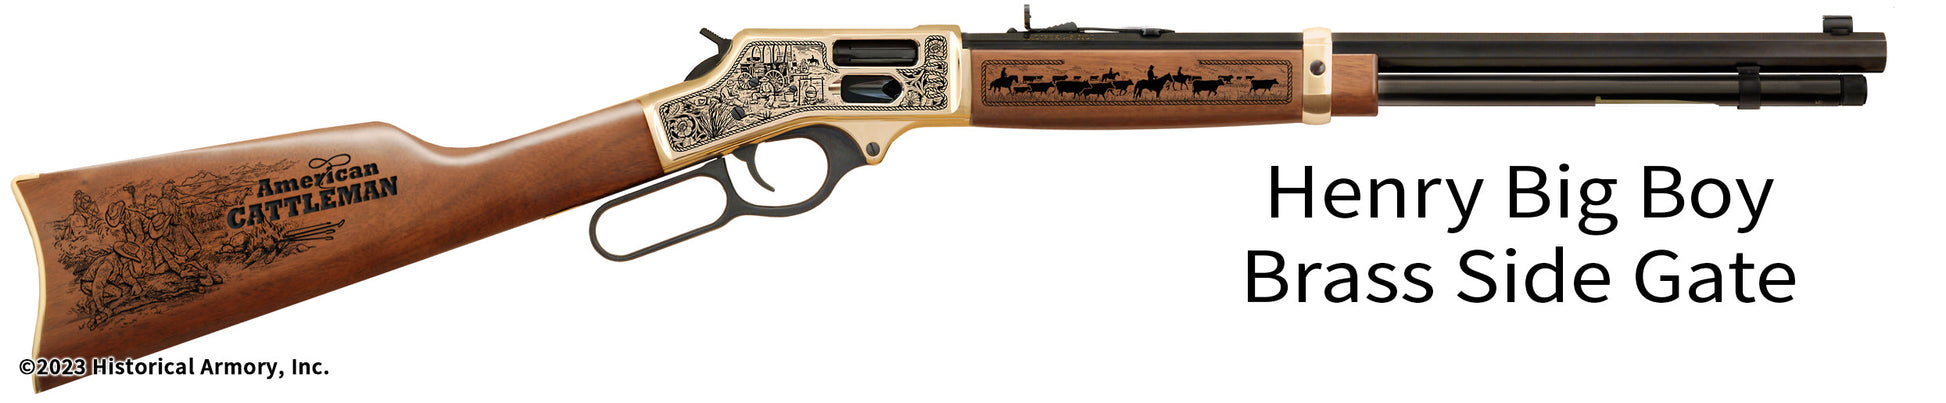 American Cattleman Limited Edition Henry Big Boy Brass Side Gate Engraved Rifle